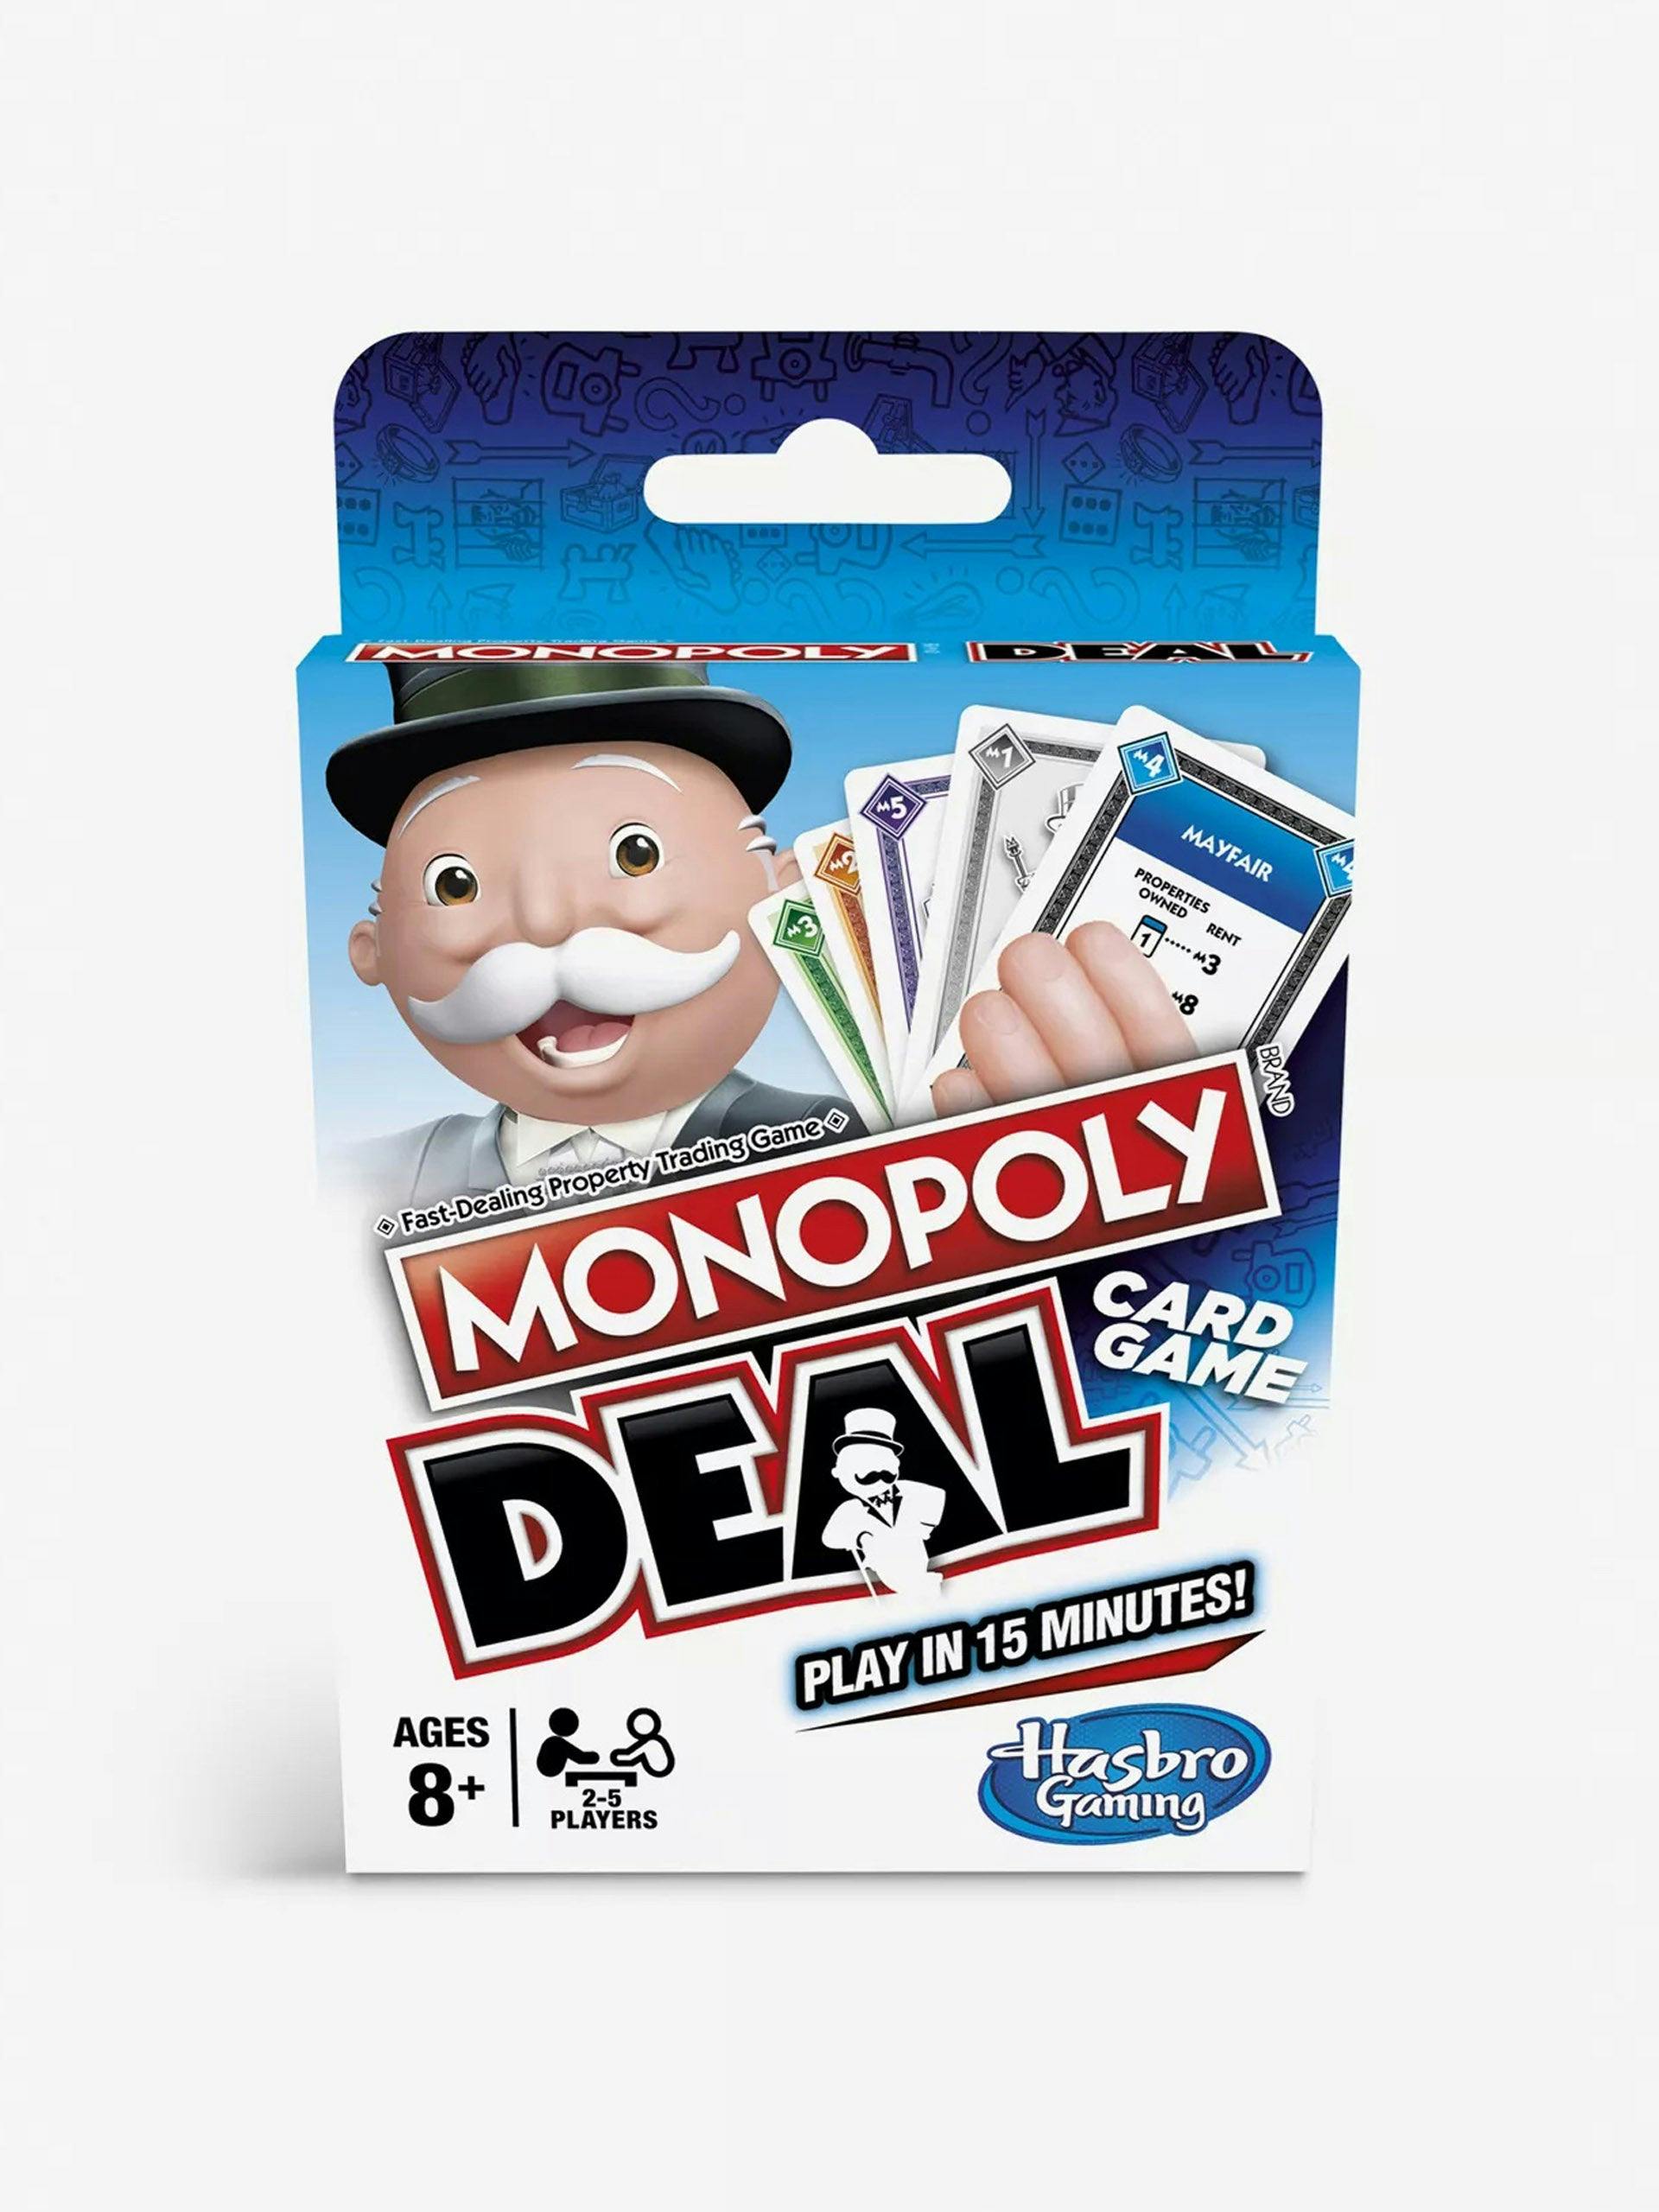 Monopoly Deal card game